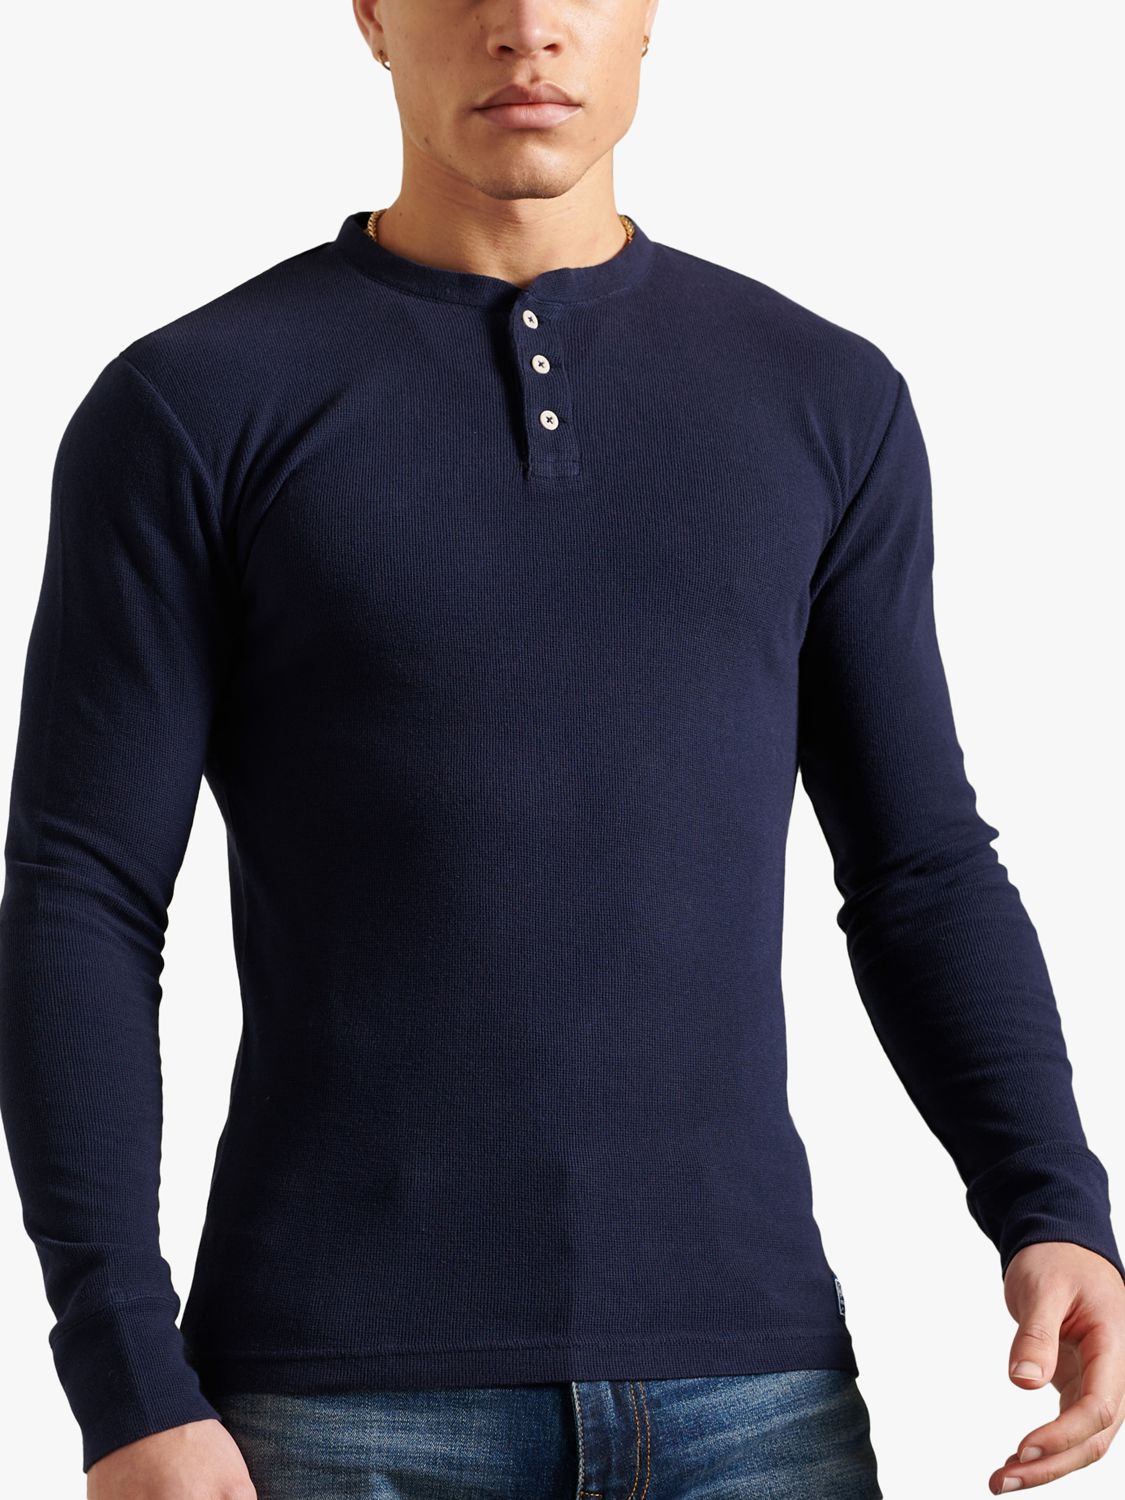 Men's Organic Cotton Long Sleeve Waffle Henley Top in Brilliant